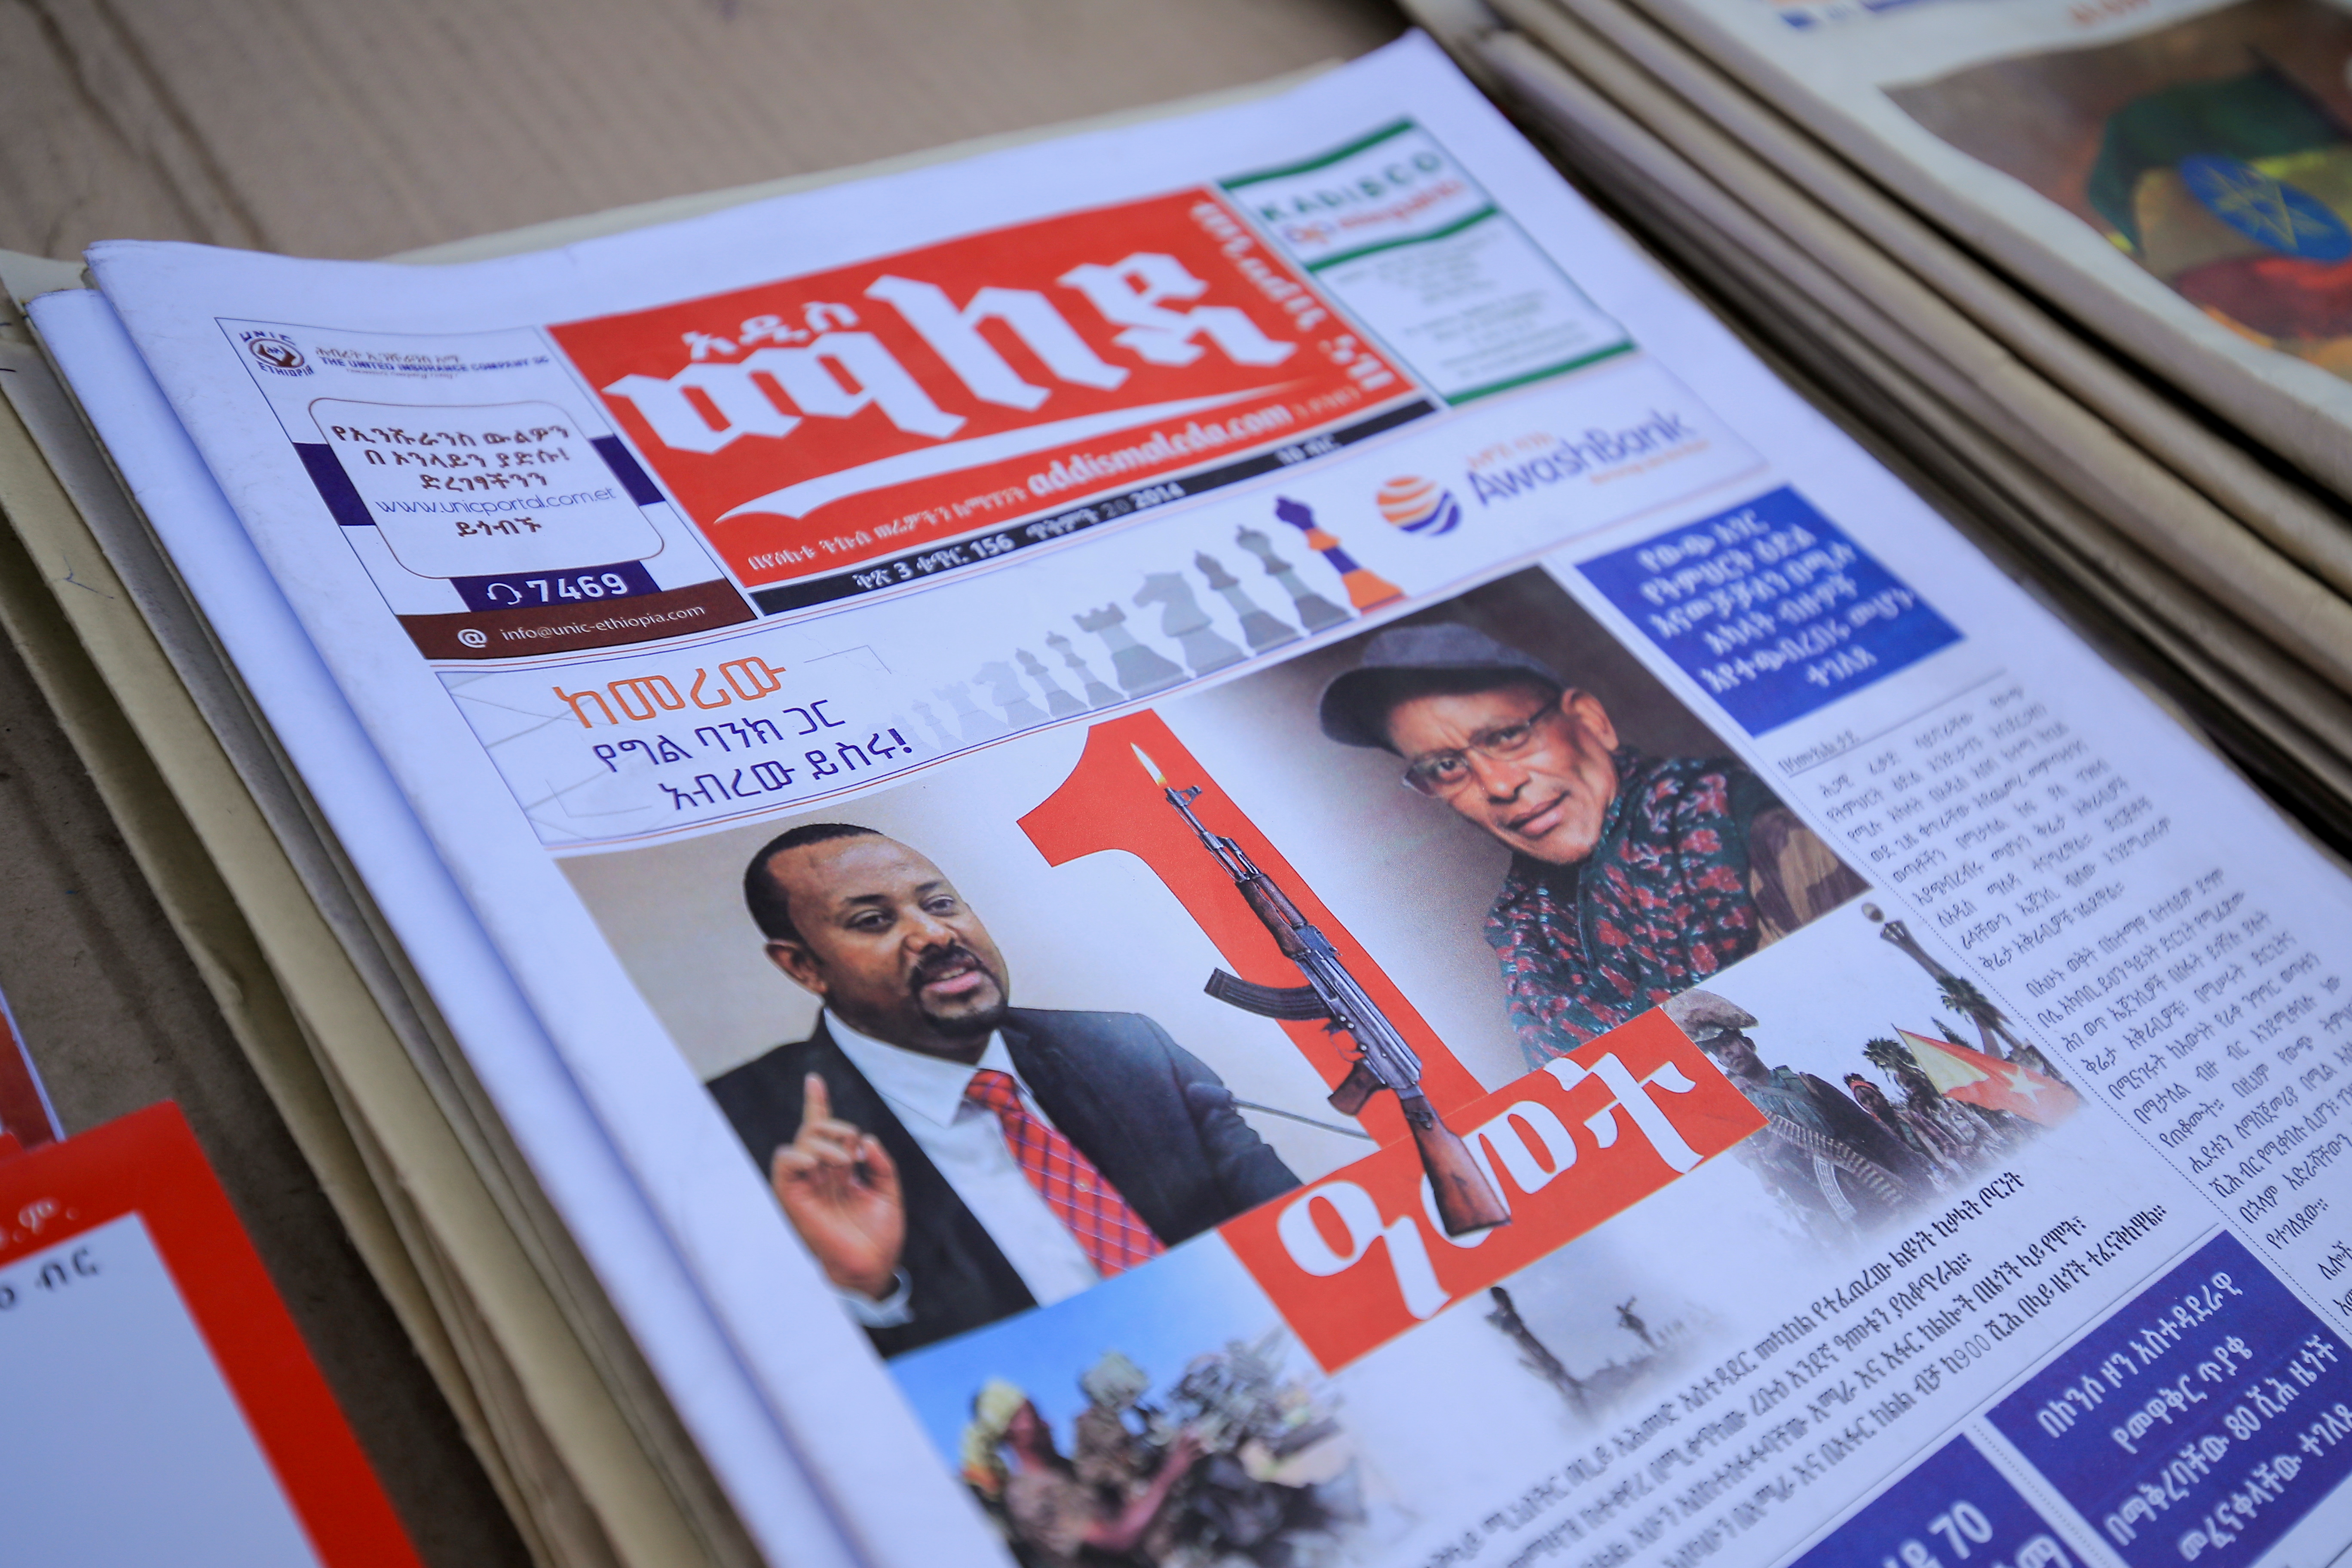 Ethiopia’s Prime Minister Ahmed and leader of the Tigray People's Liberation Front (TPLF) party Gebremichael are pictured on the Maleda Local News papers, in Addis Ababa